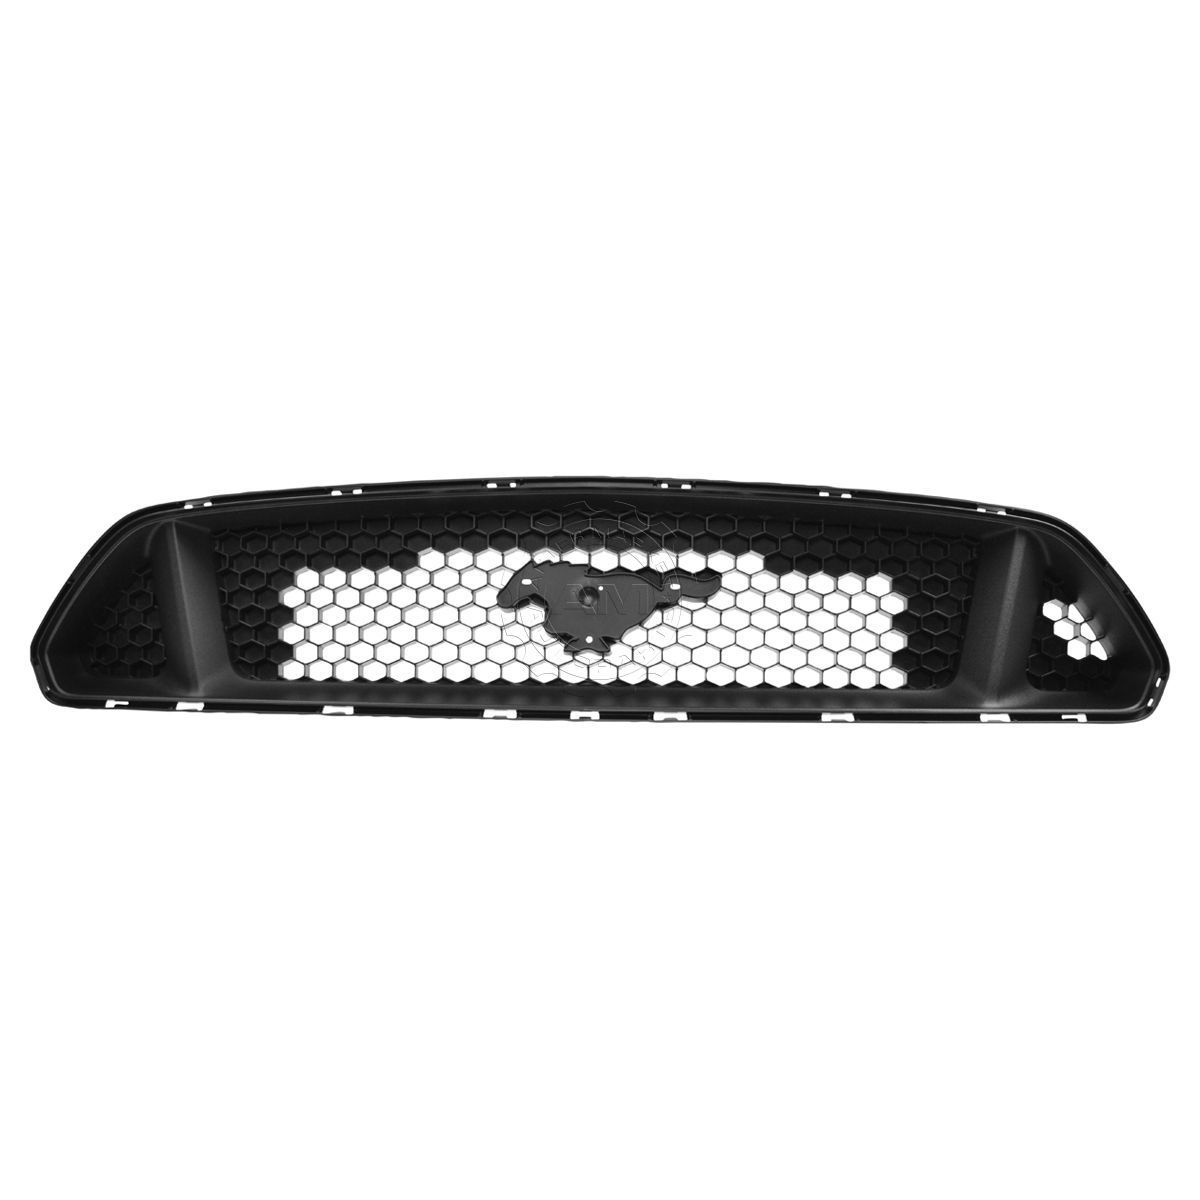 Grila radiator Ford Mustang, 02.2013-2015, Cu Element Cromat, Pentru Echipare Pony Package, DR3Z-8200-AD